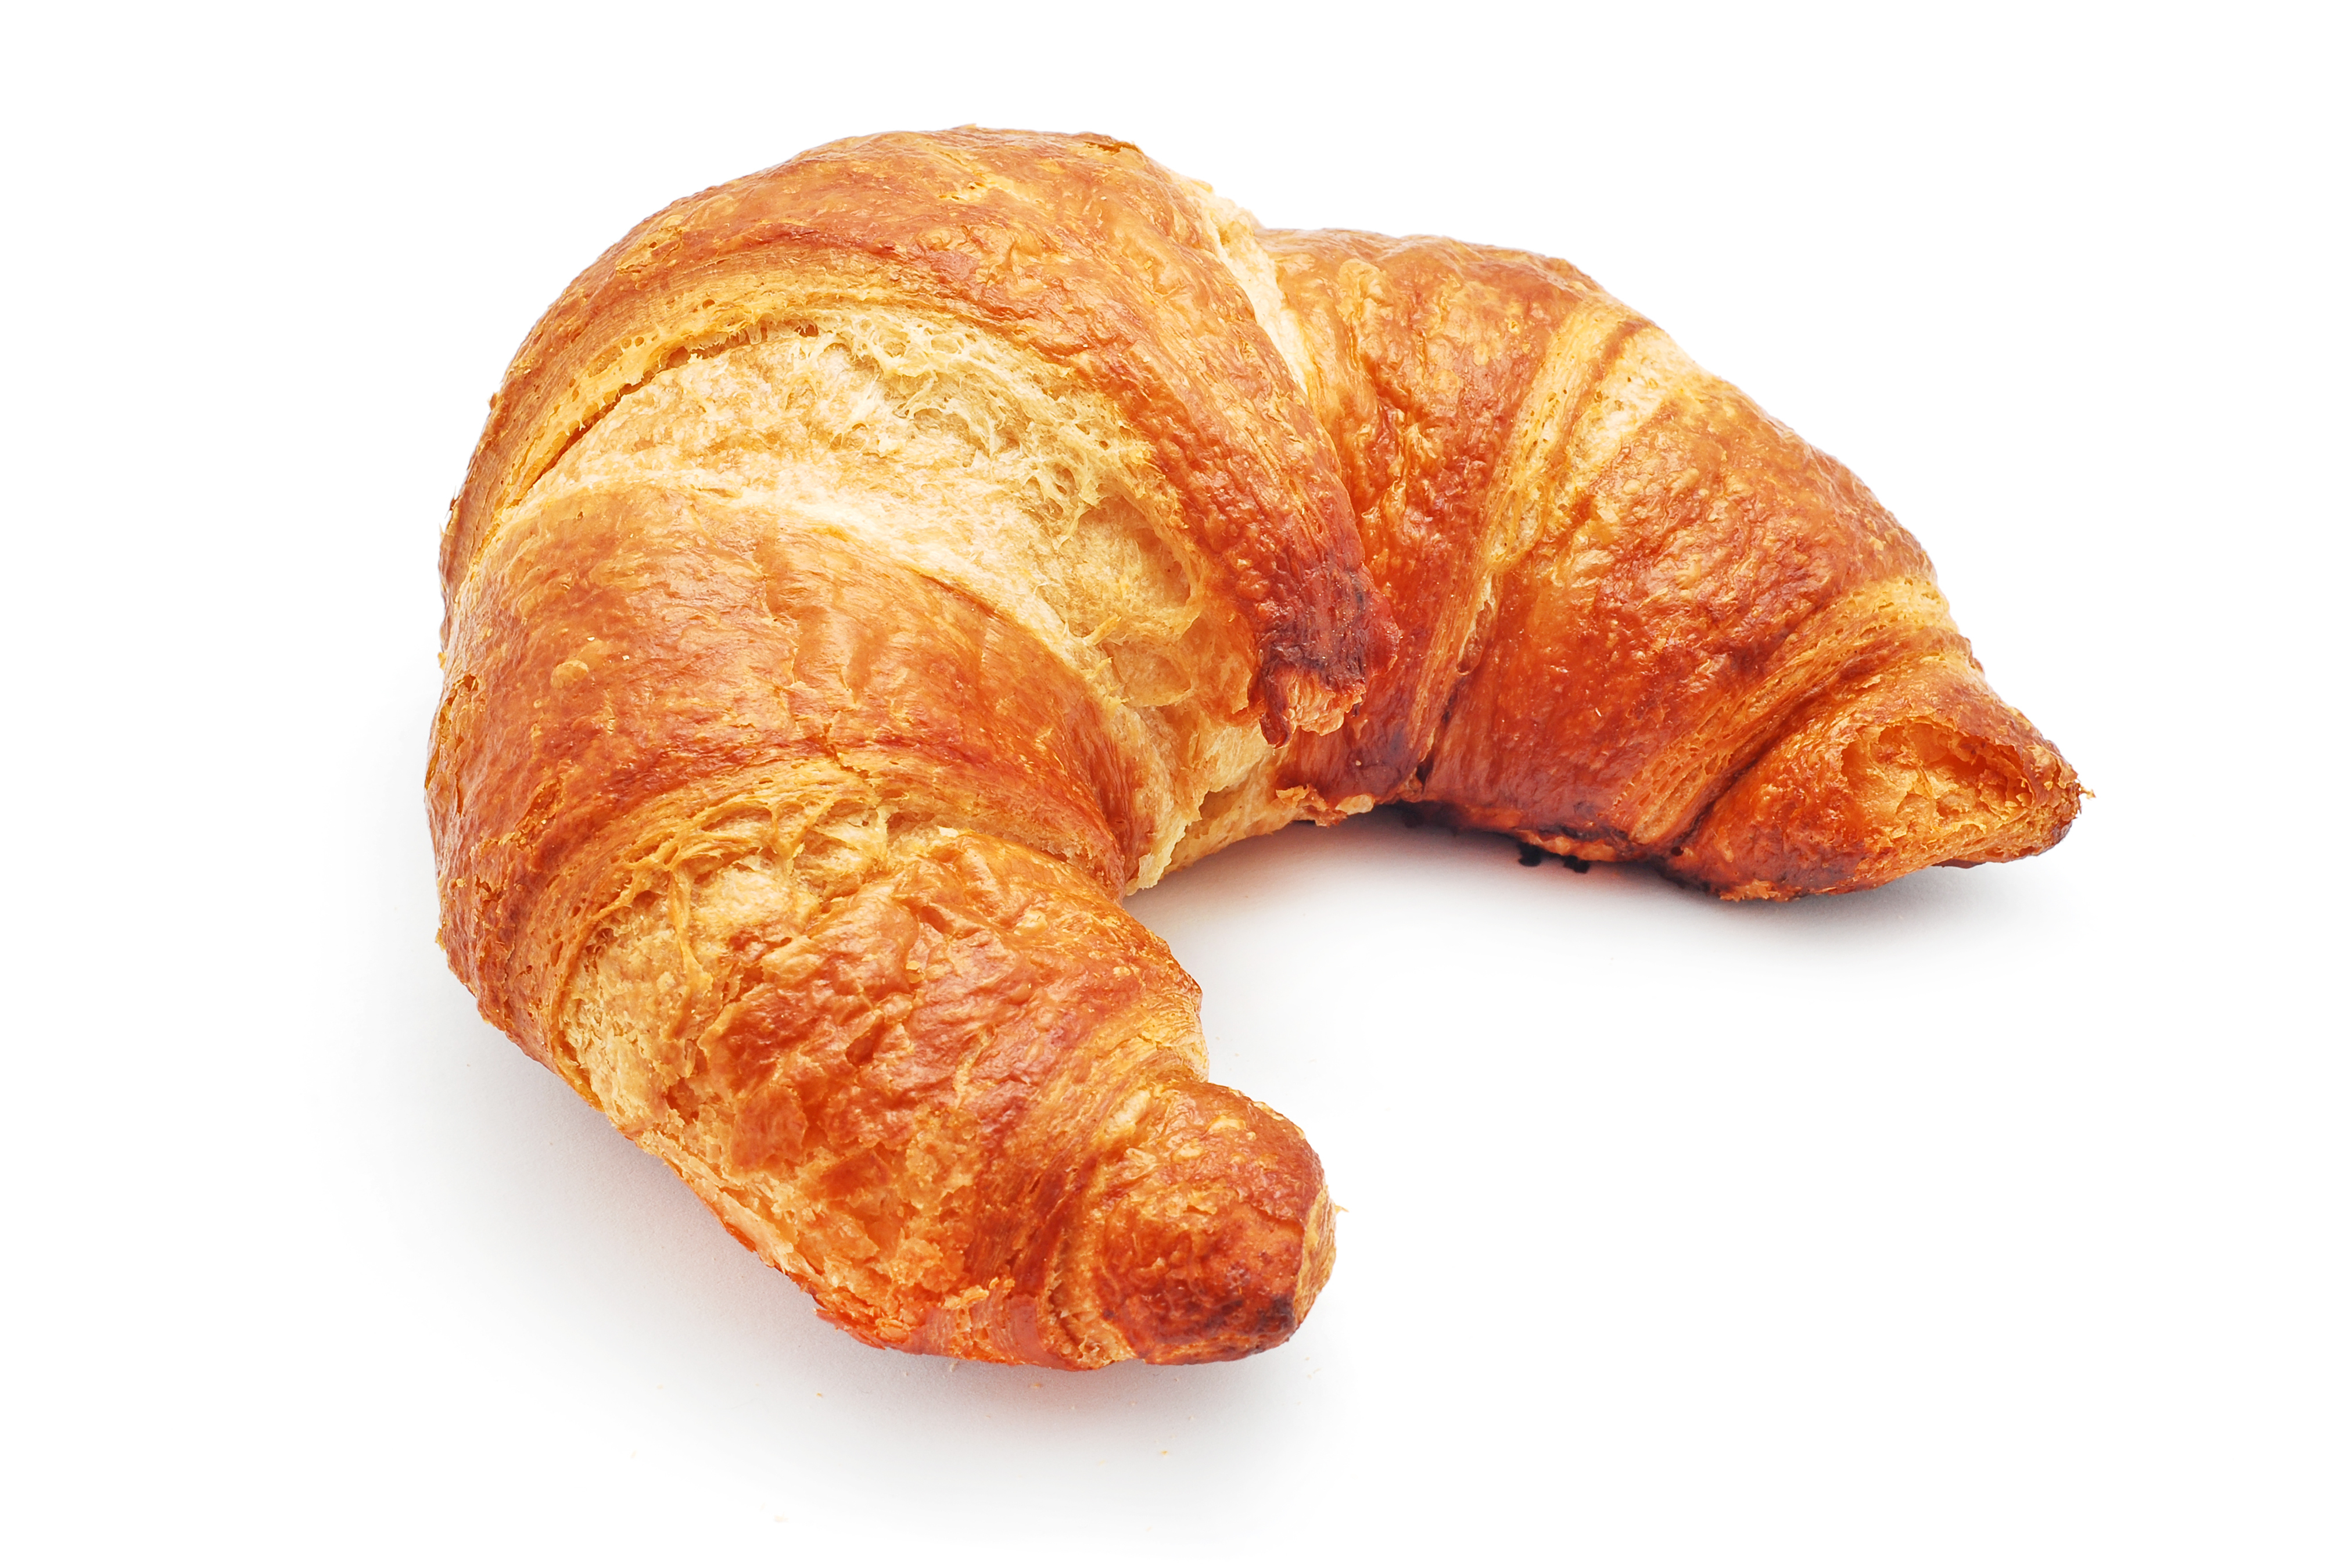 HQ Croissant Wallpapers | File 4036.08Kb